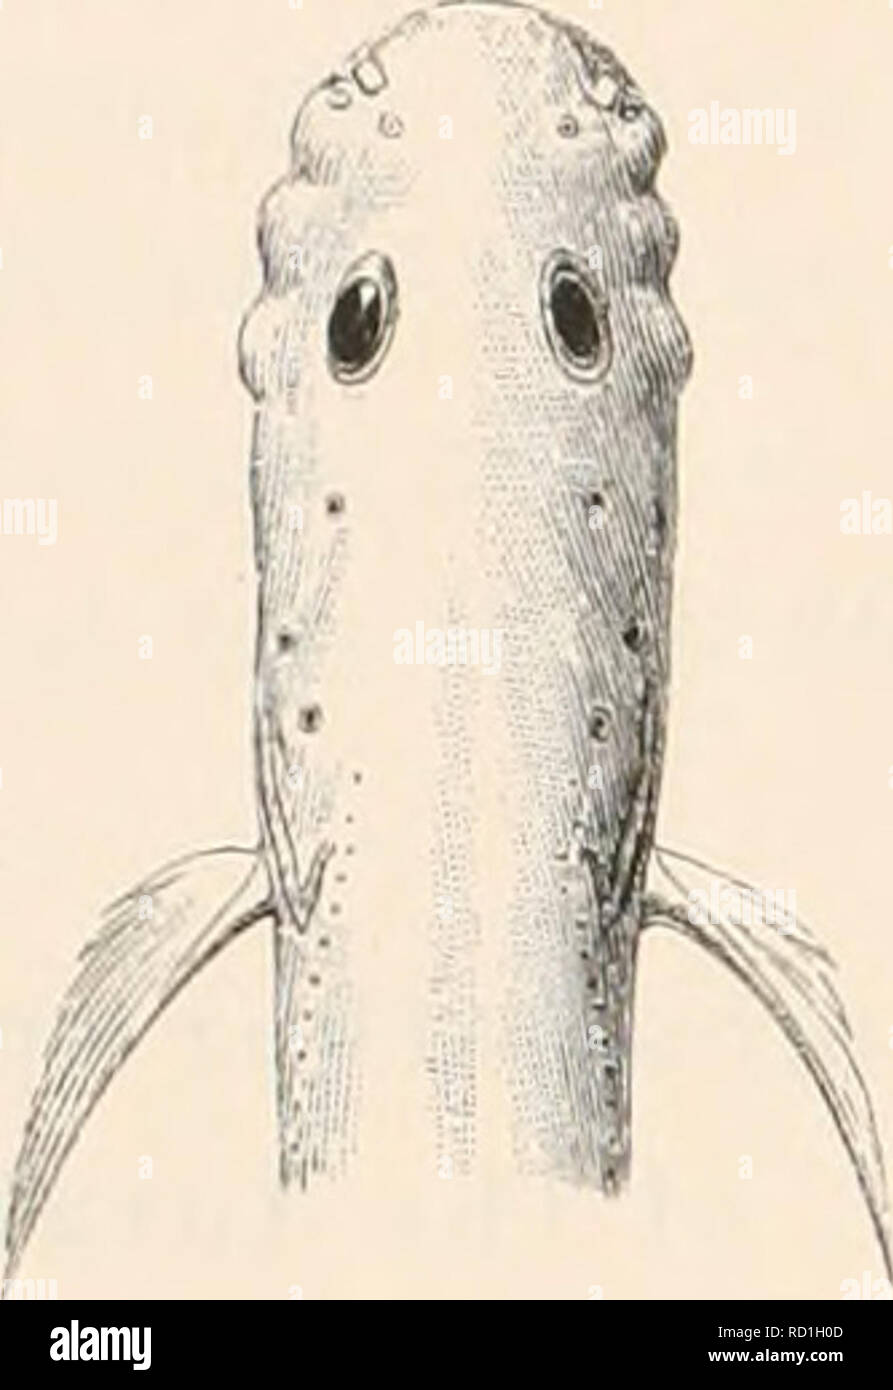 . The Danish Ingolf-Expedition. Scientific expeditions; Arctic Ocean. 52 LVCODIN.E. and a lialf times the diameter of the ee. The length of the snout to the eye, is not quite 3'/2 times in the wliole length of the head. The lower jaw extends almost as far forward as the npper, whose posterior angle lies under the anterior third of the eye. The lips are tolerably fleshy. The teeth are small and pointed, placed as usual on the intermaxillar}', palatal, vomer and mandible. The grooves for the pores of the lateral line are in parts considerable and very deep, surrounded b- soft, projec- ting bor Stock Photo